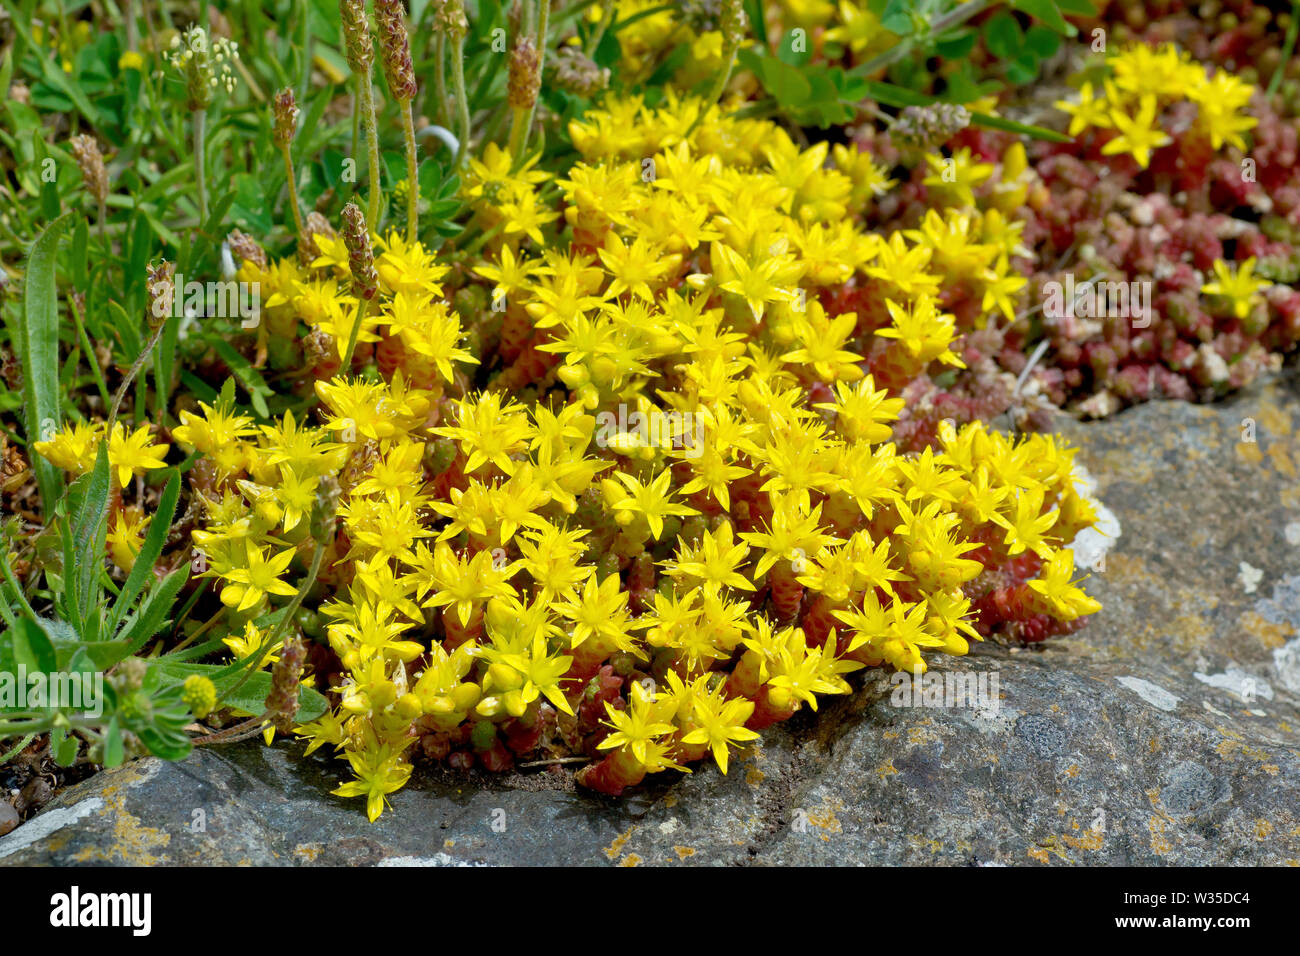 Biting Stonecrop Or Wallpepper Sedum Acre Close Up Of A Mat Of Flowers Creeping Across A Rocky Surface Stock Photo Alamy